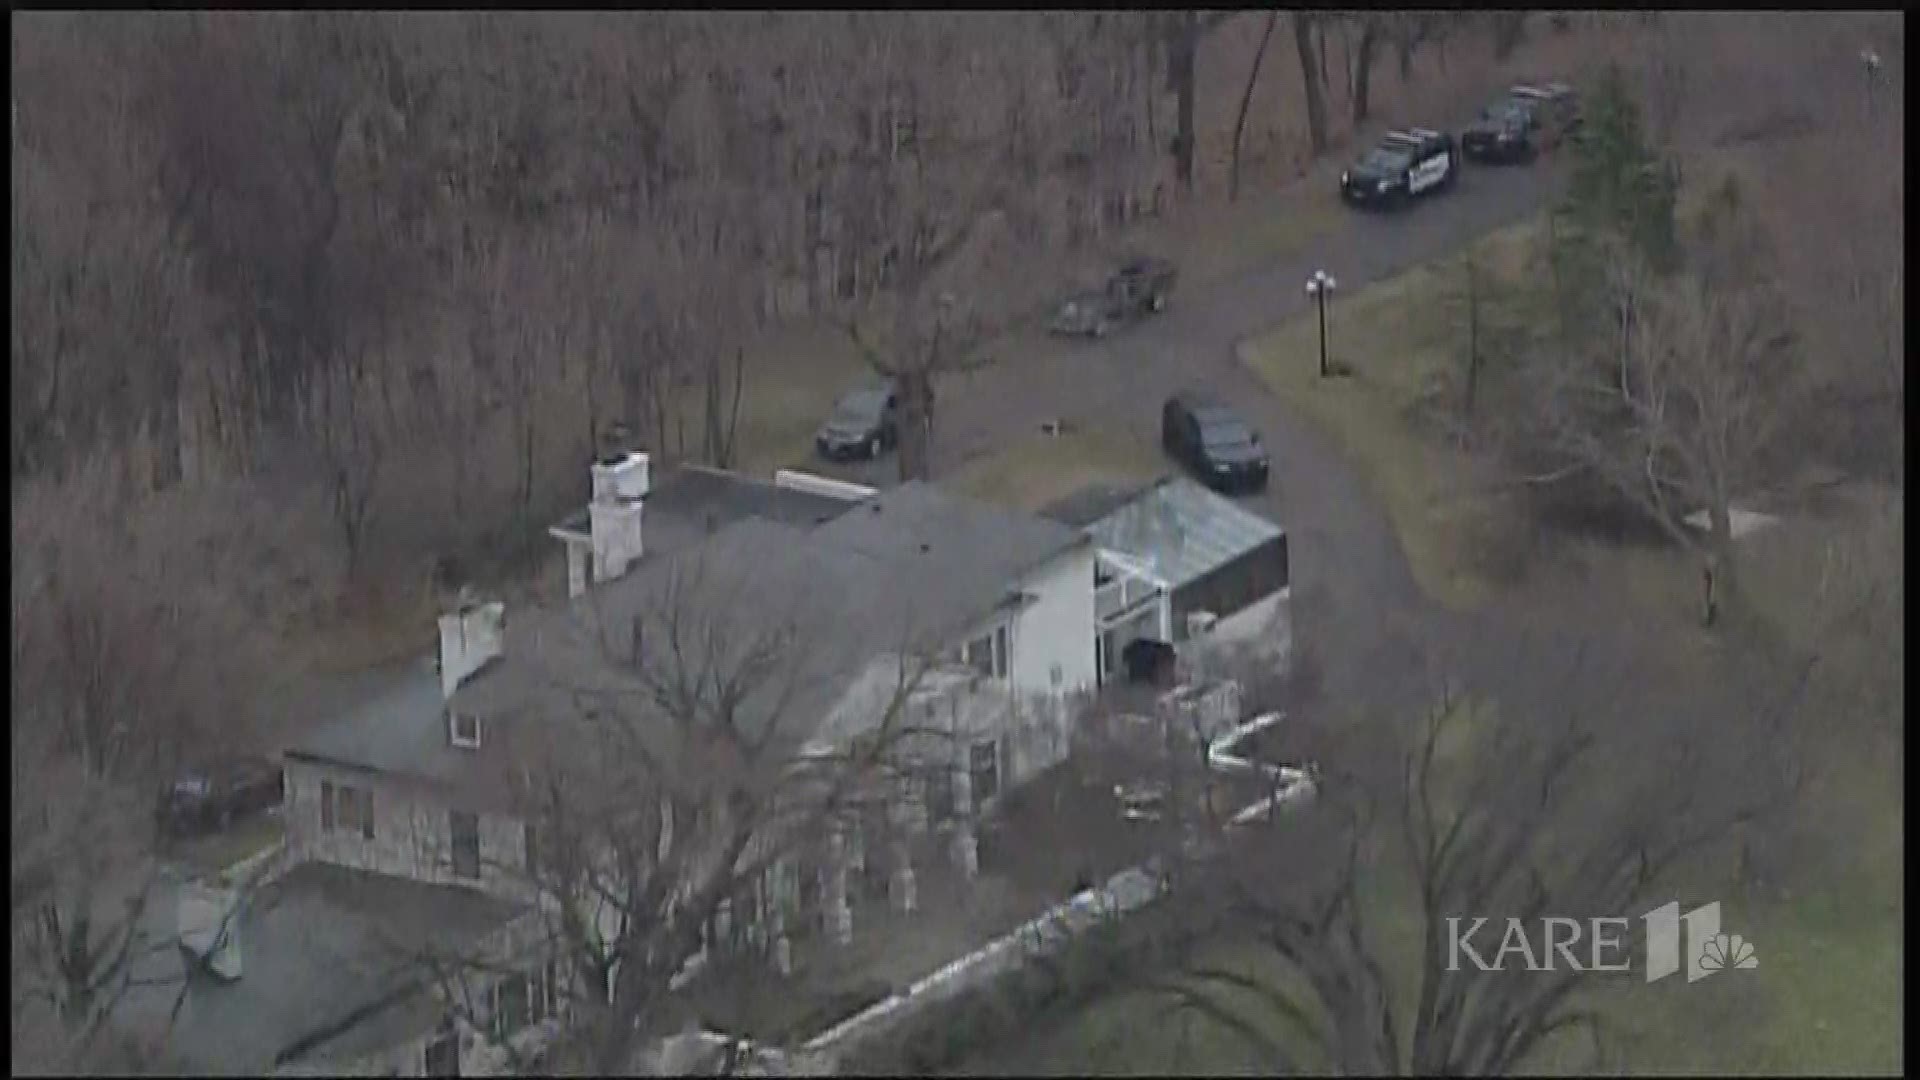 RAW: Aerial video of a home owned by Irwin L. Jacobs in Orono, Minnesota, where two people were found dead Wednesday morning. https://kare11.tv/2KrR4UL